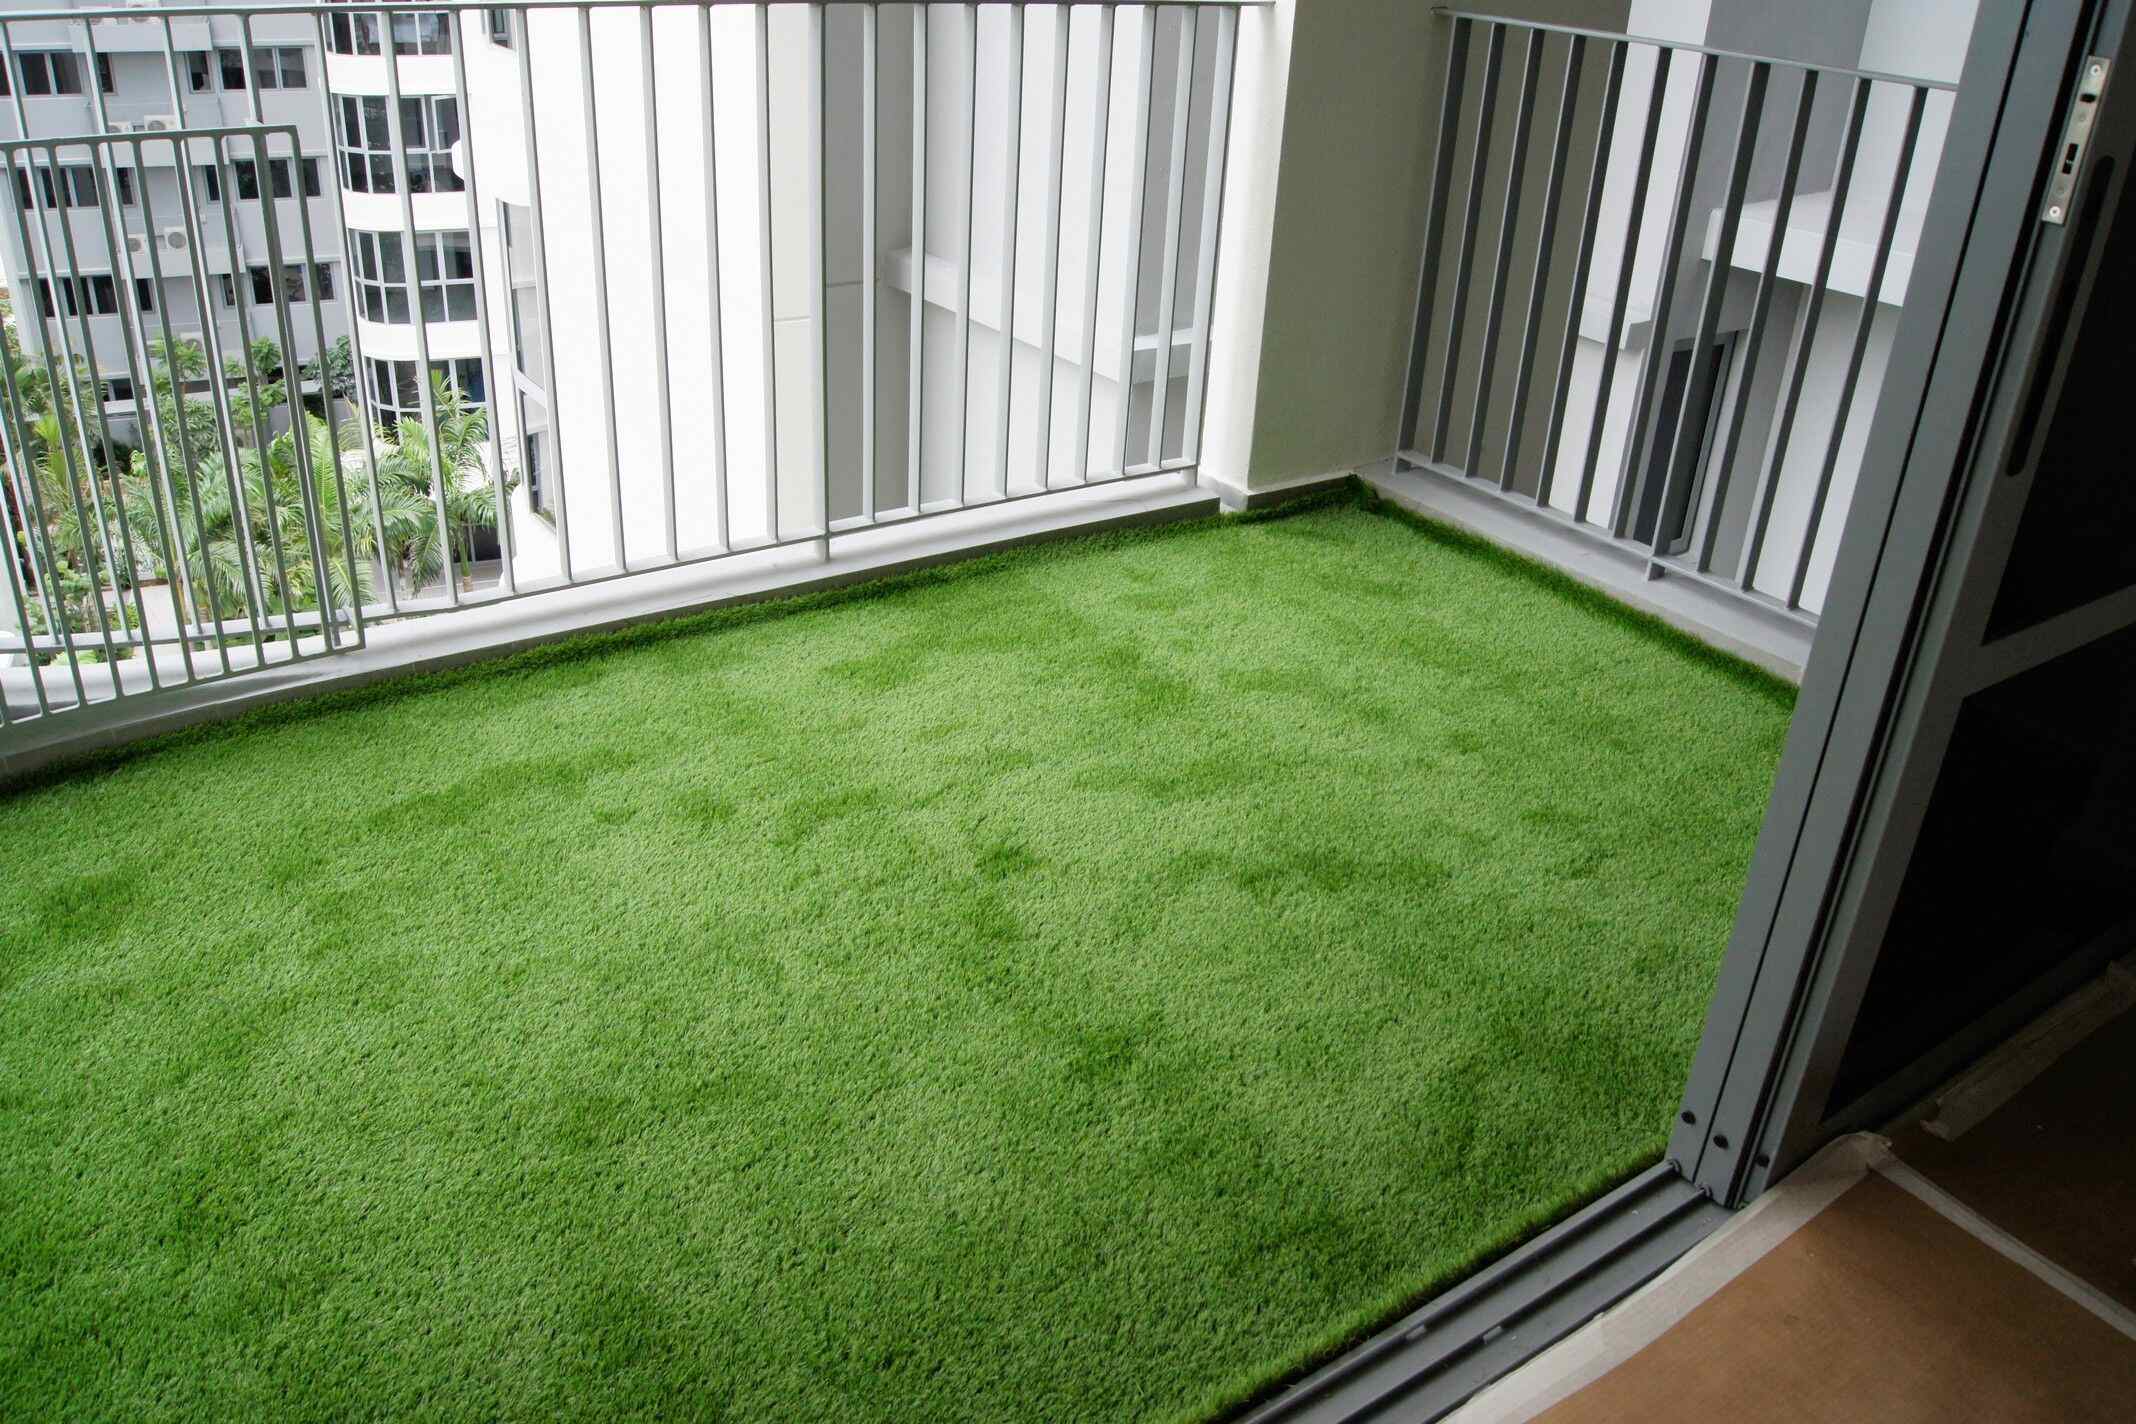 How To Clean Artificial Grass On Balcony